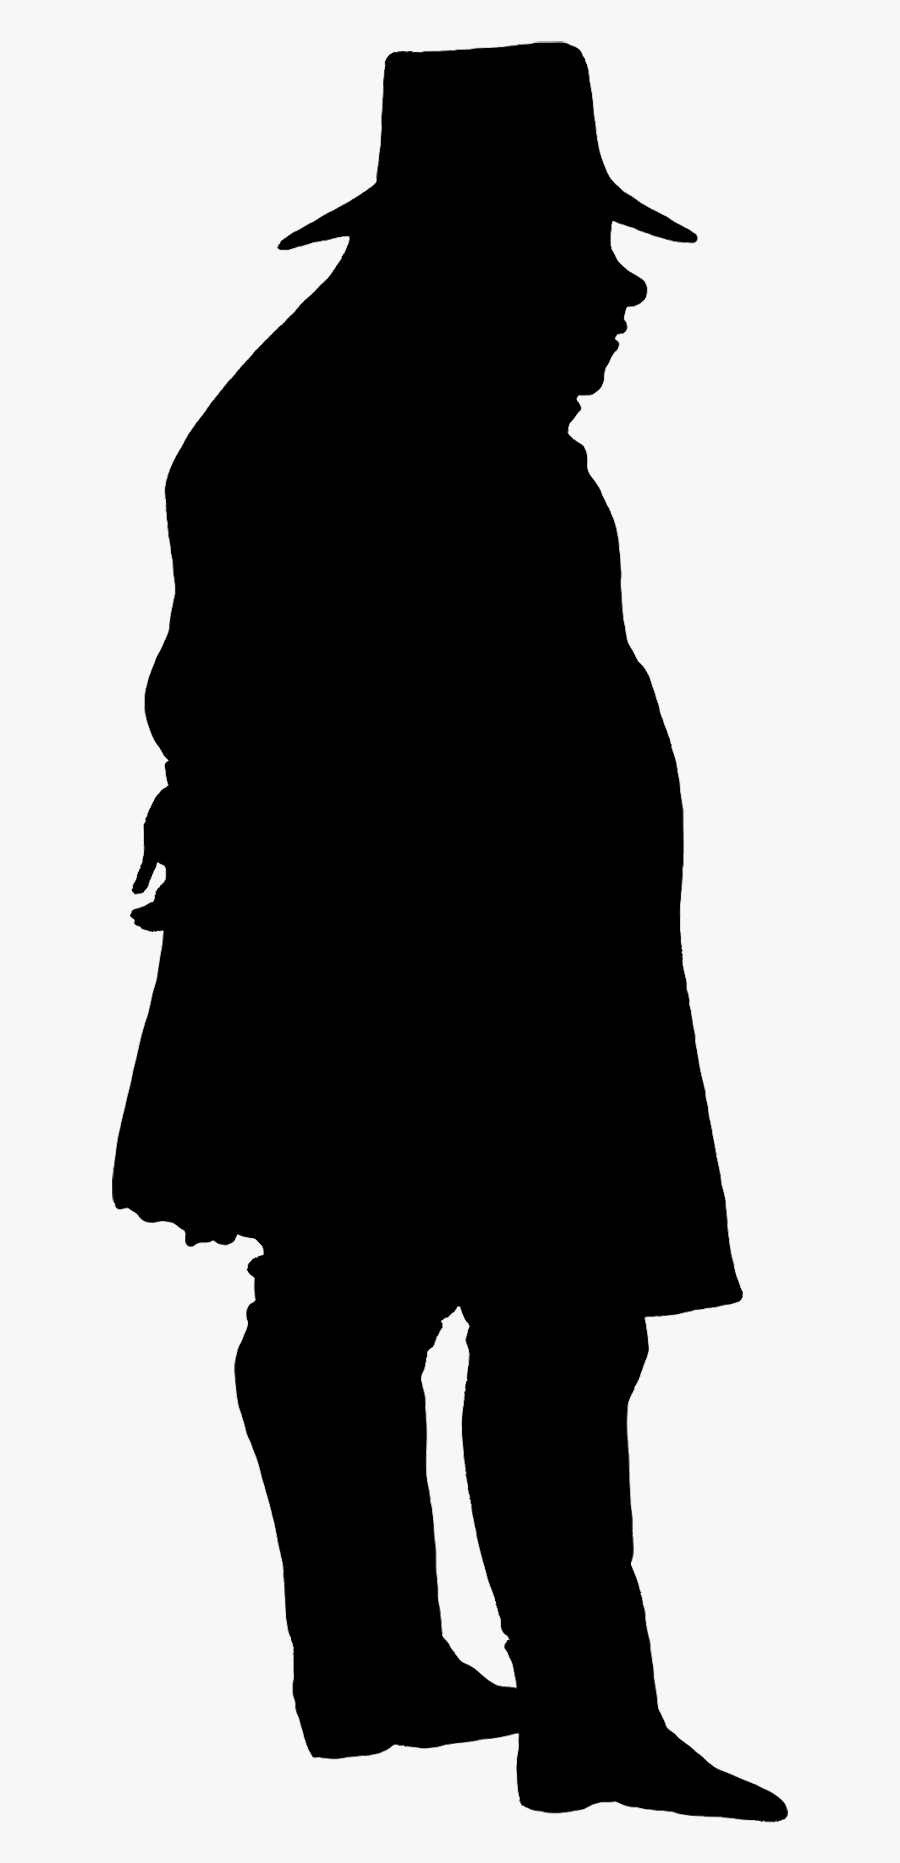 Man Silhouette Clipart, Cliparts Of Man Silhouette - Old Man Silhouettes Png, Transparent Clipart